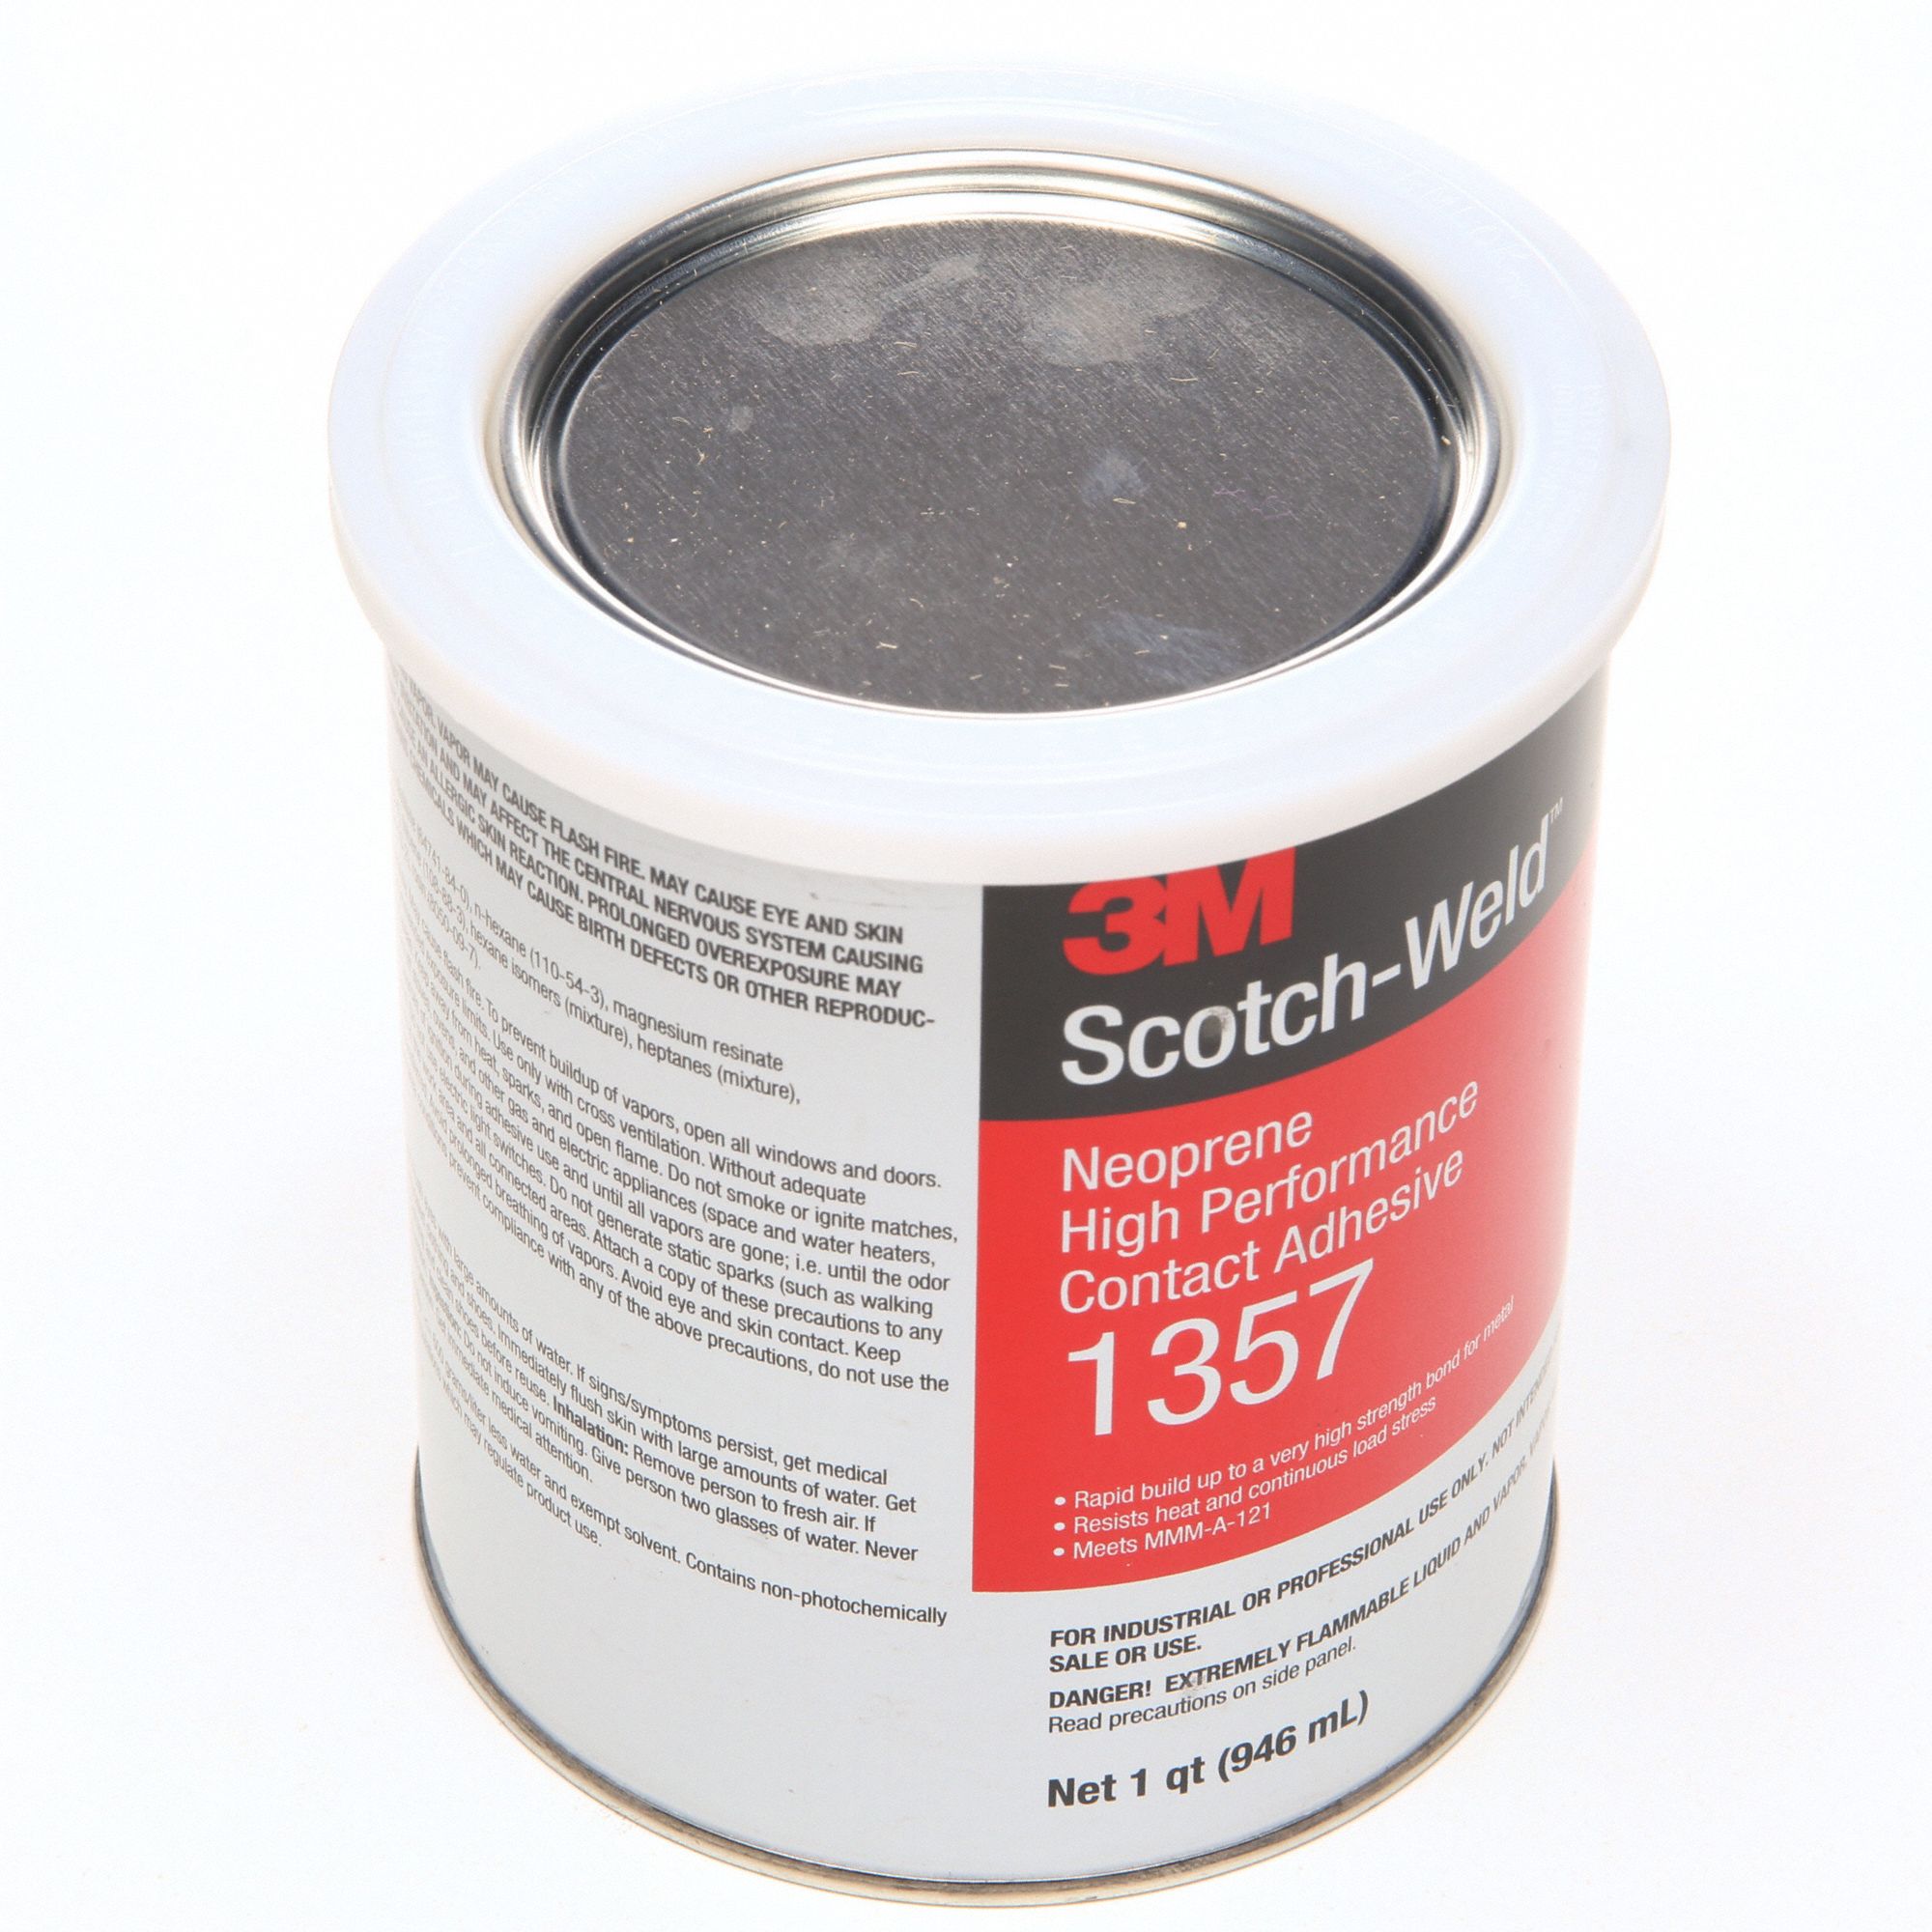 3M 021200-19891 Scotch-Weld EC-1357 Gray-Green Neoprene High Performance  Contact Adhesive - Pint Can at